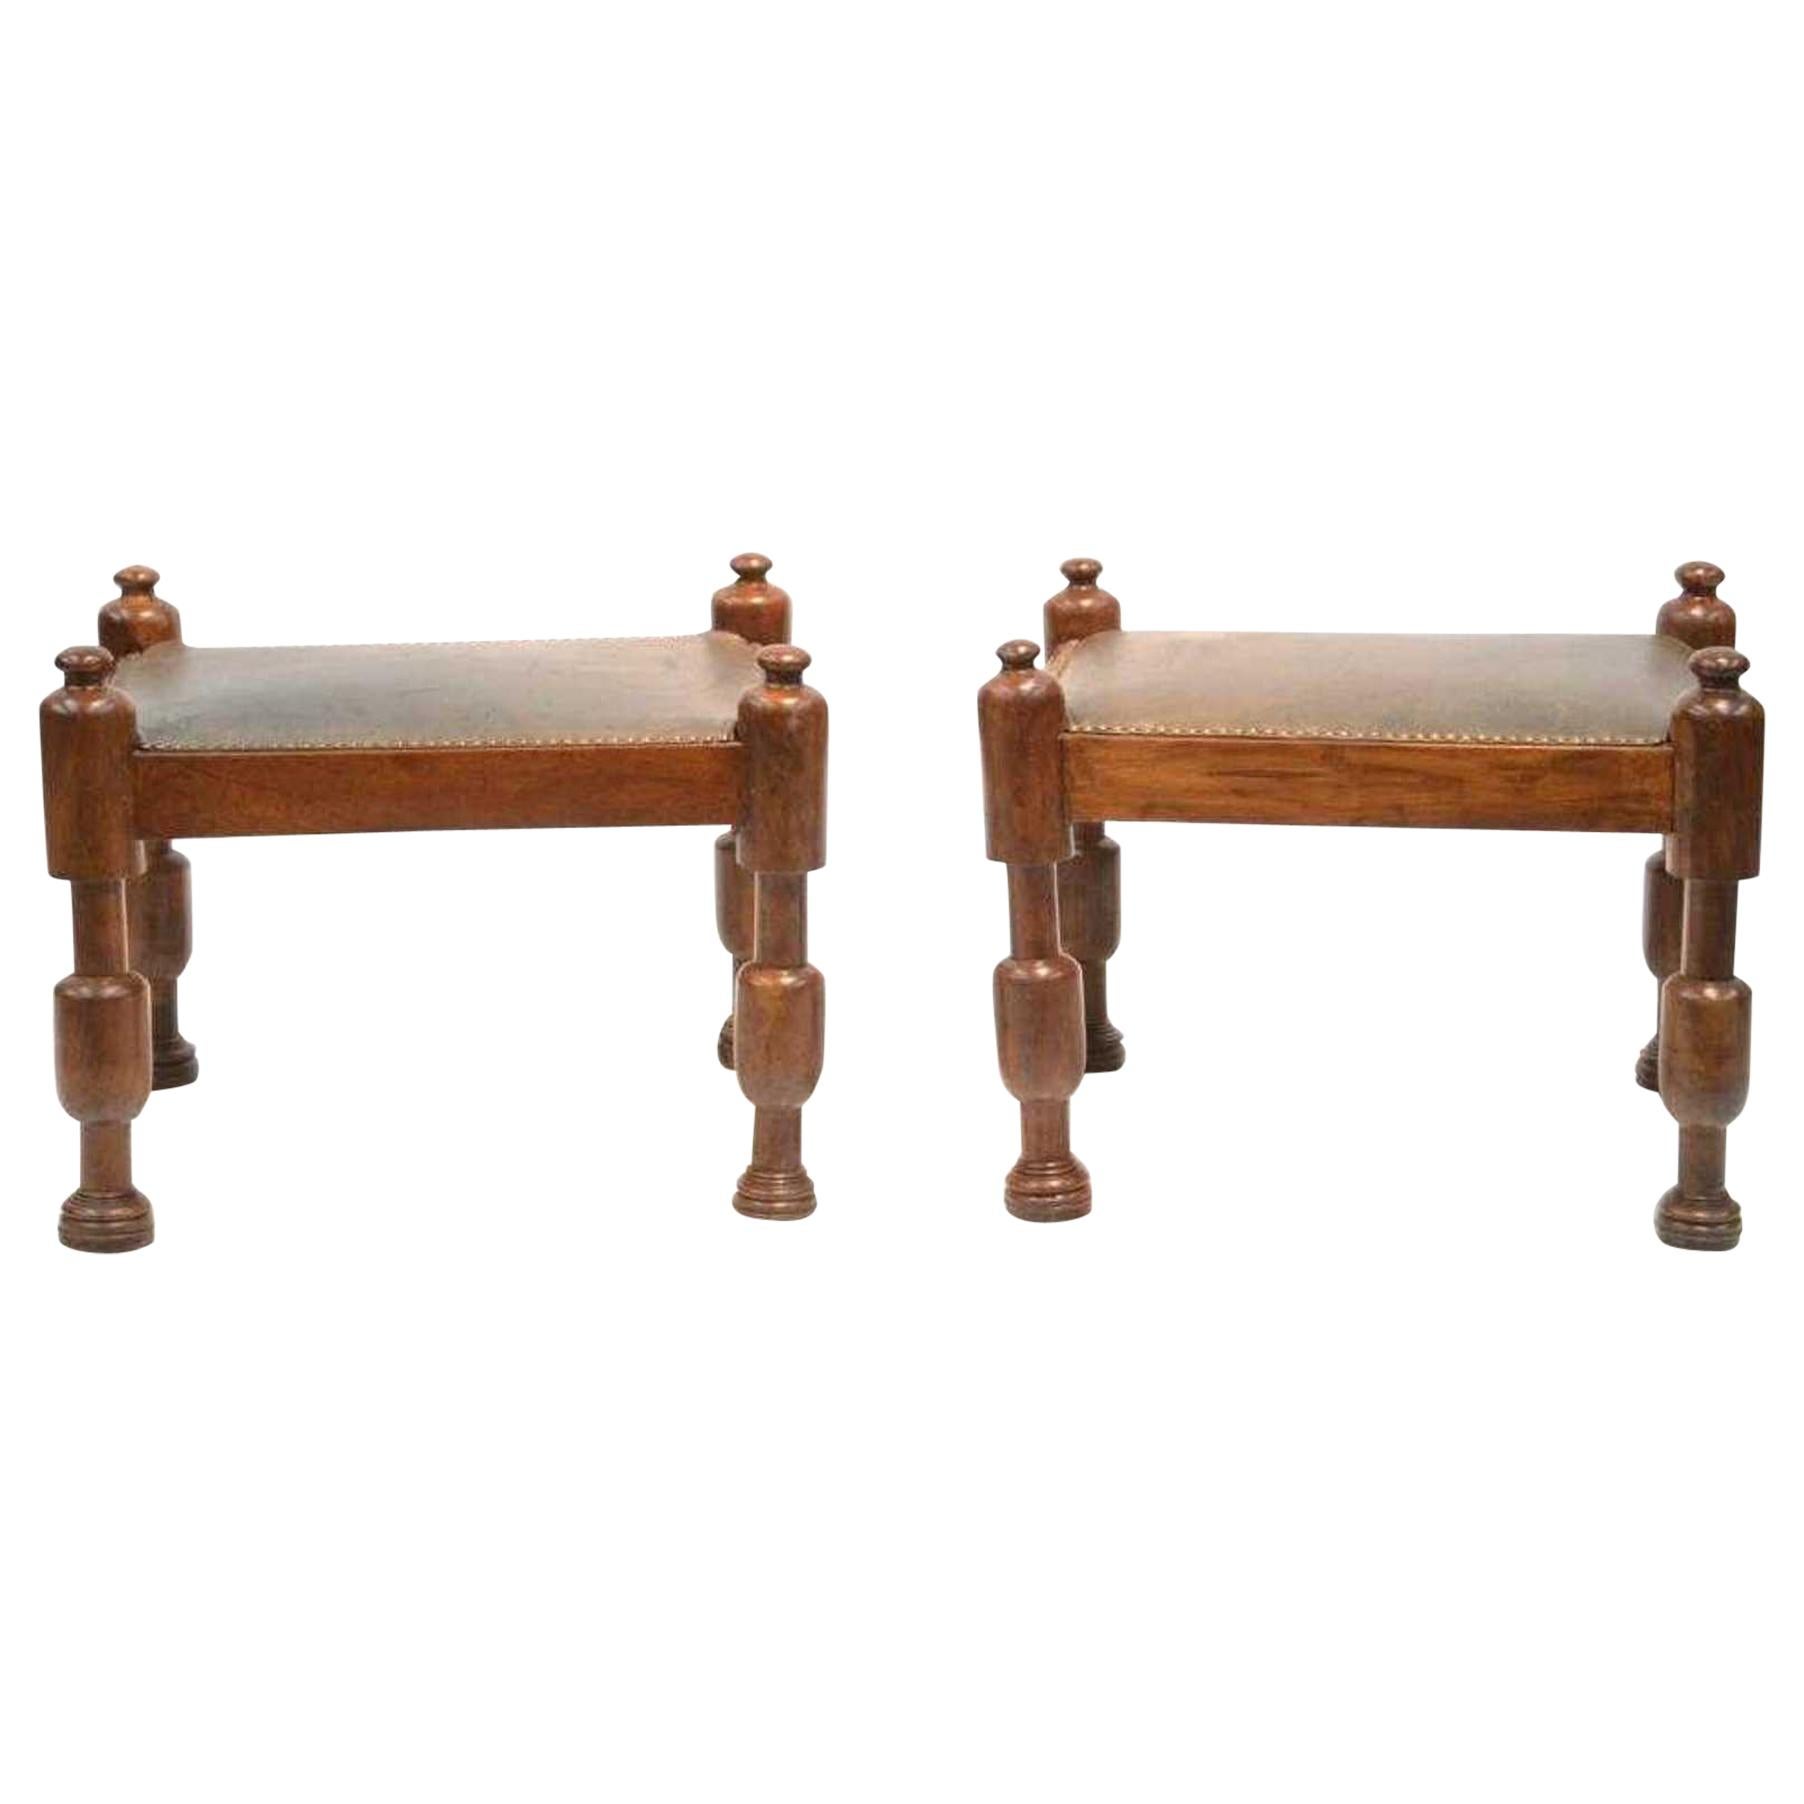 Pair of Mahogany and Leather Stools